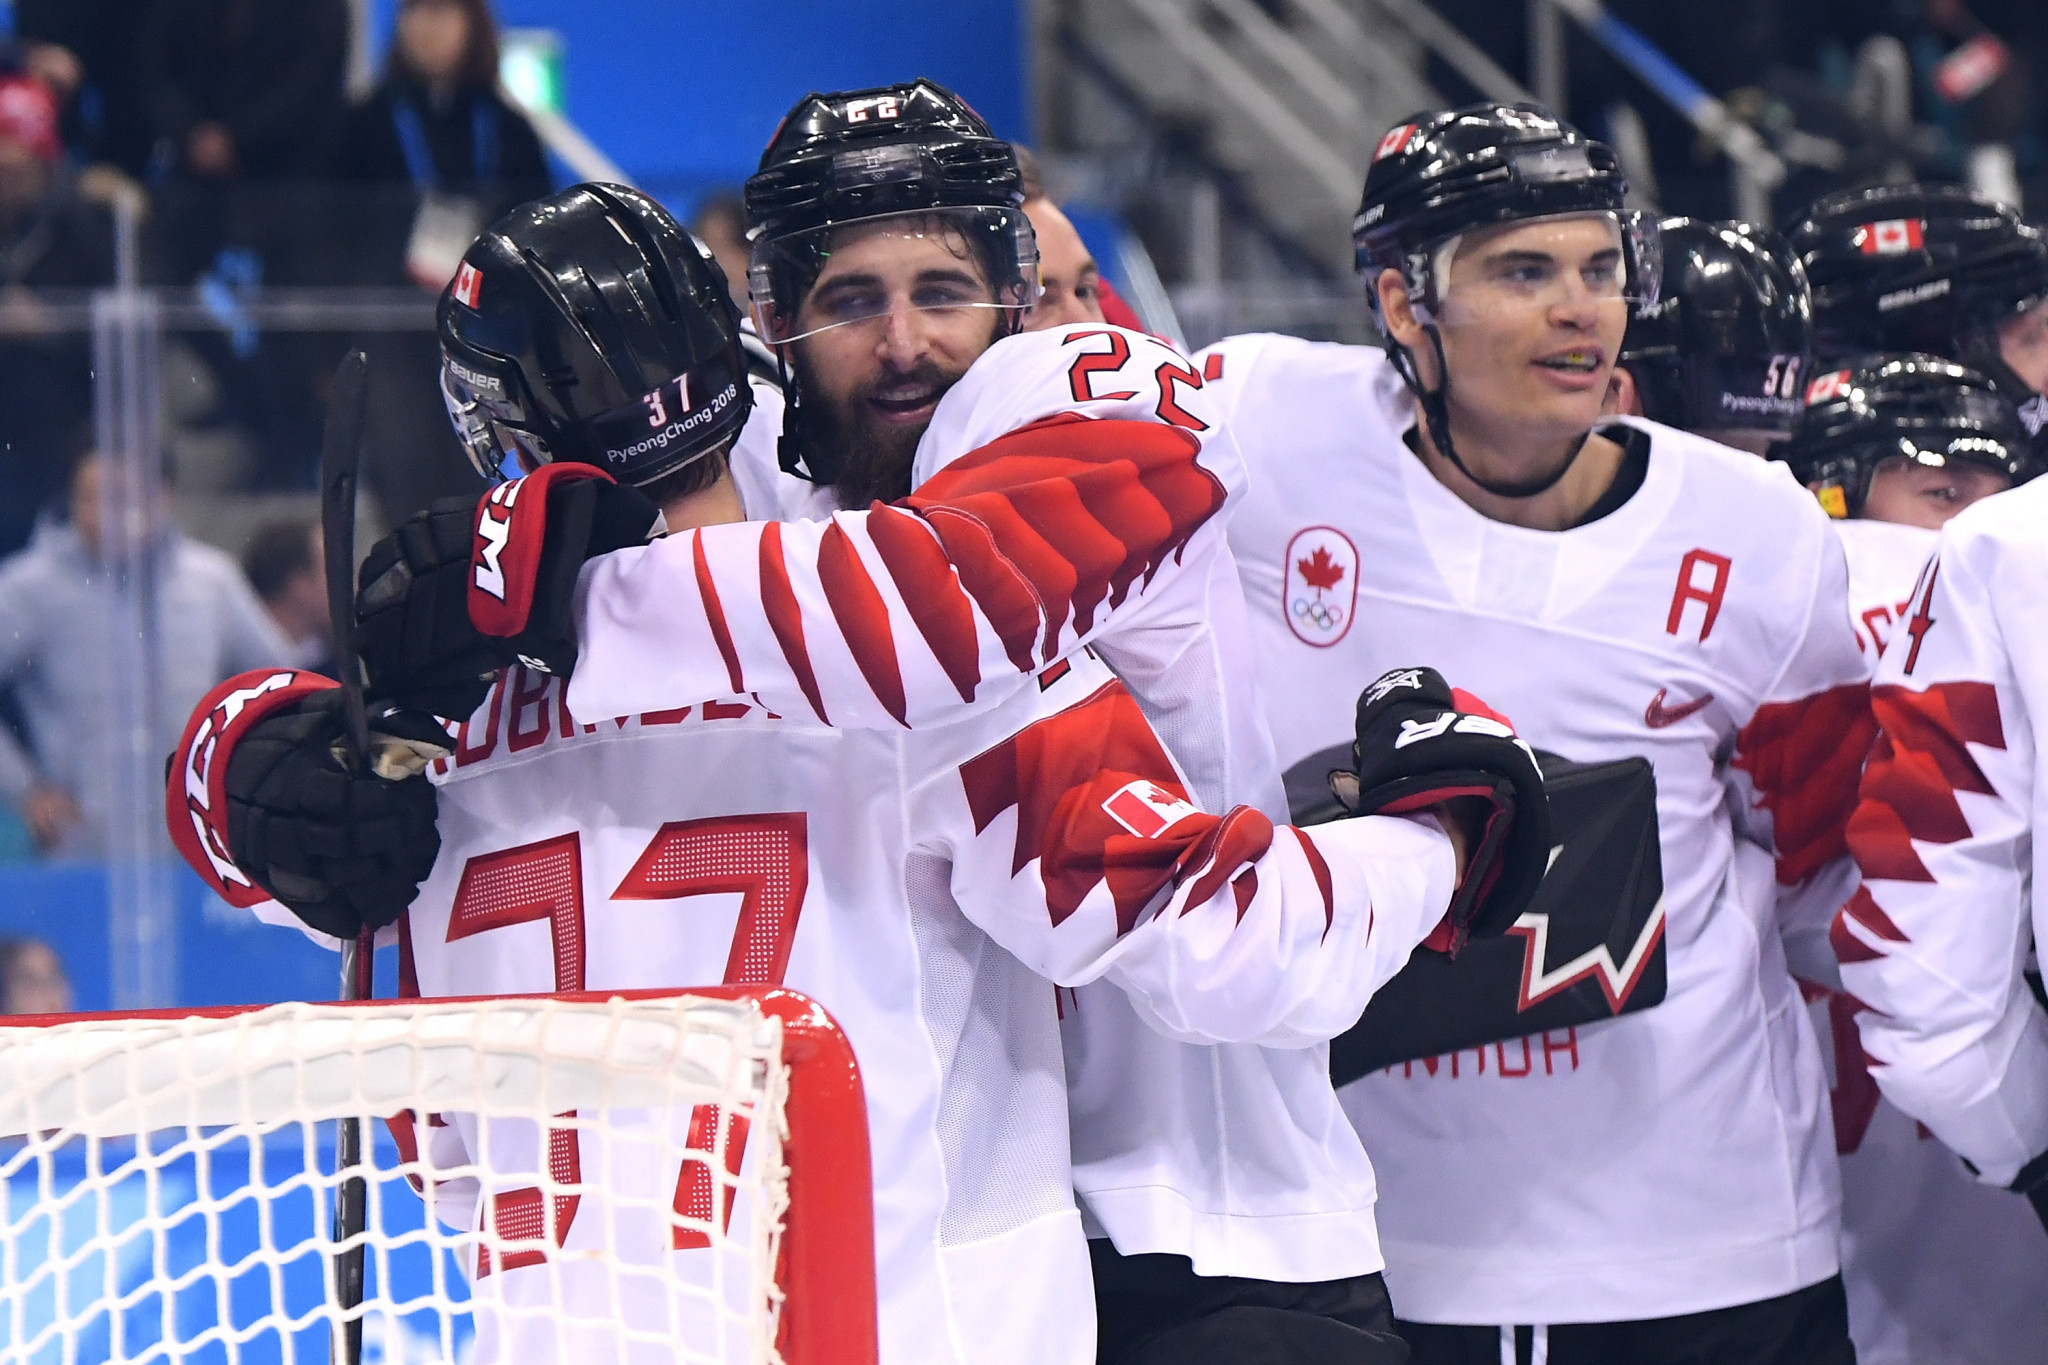 Canada remain as men's world number one in IIHF rankings despite Olympic bronze